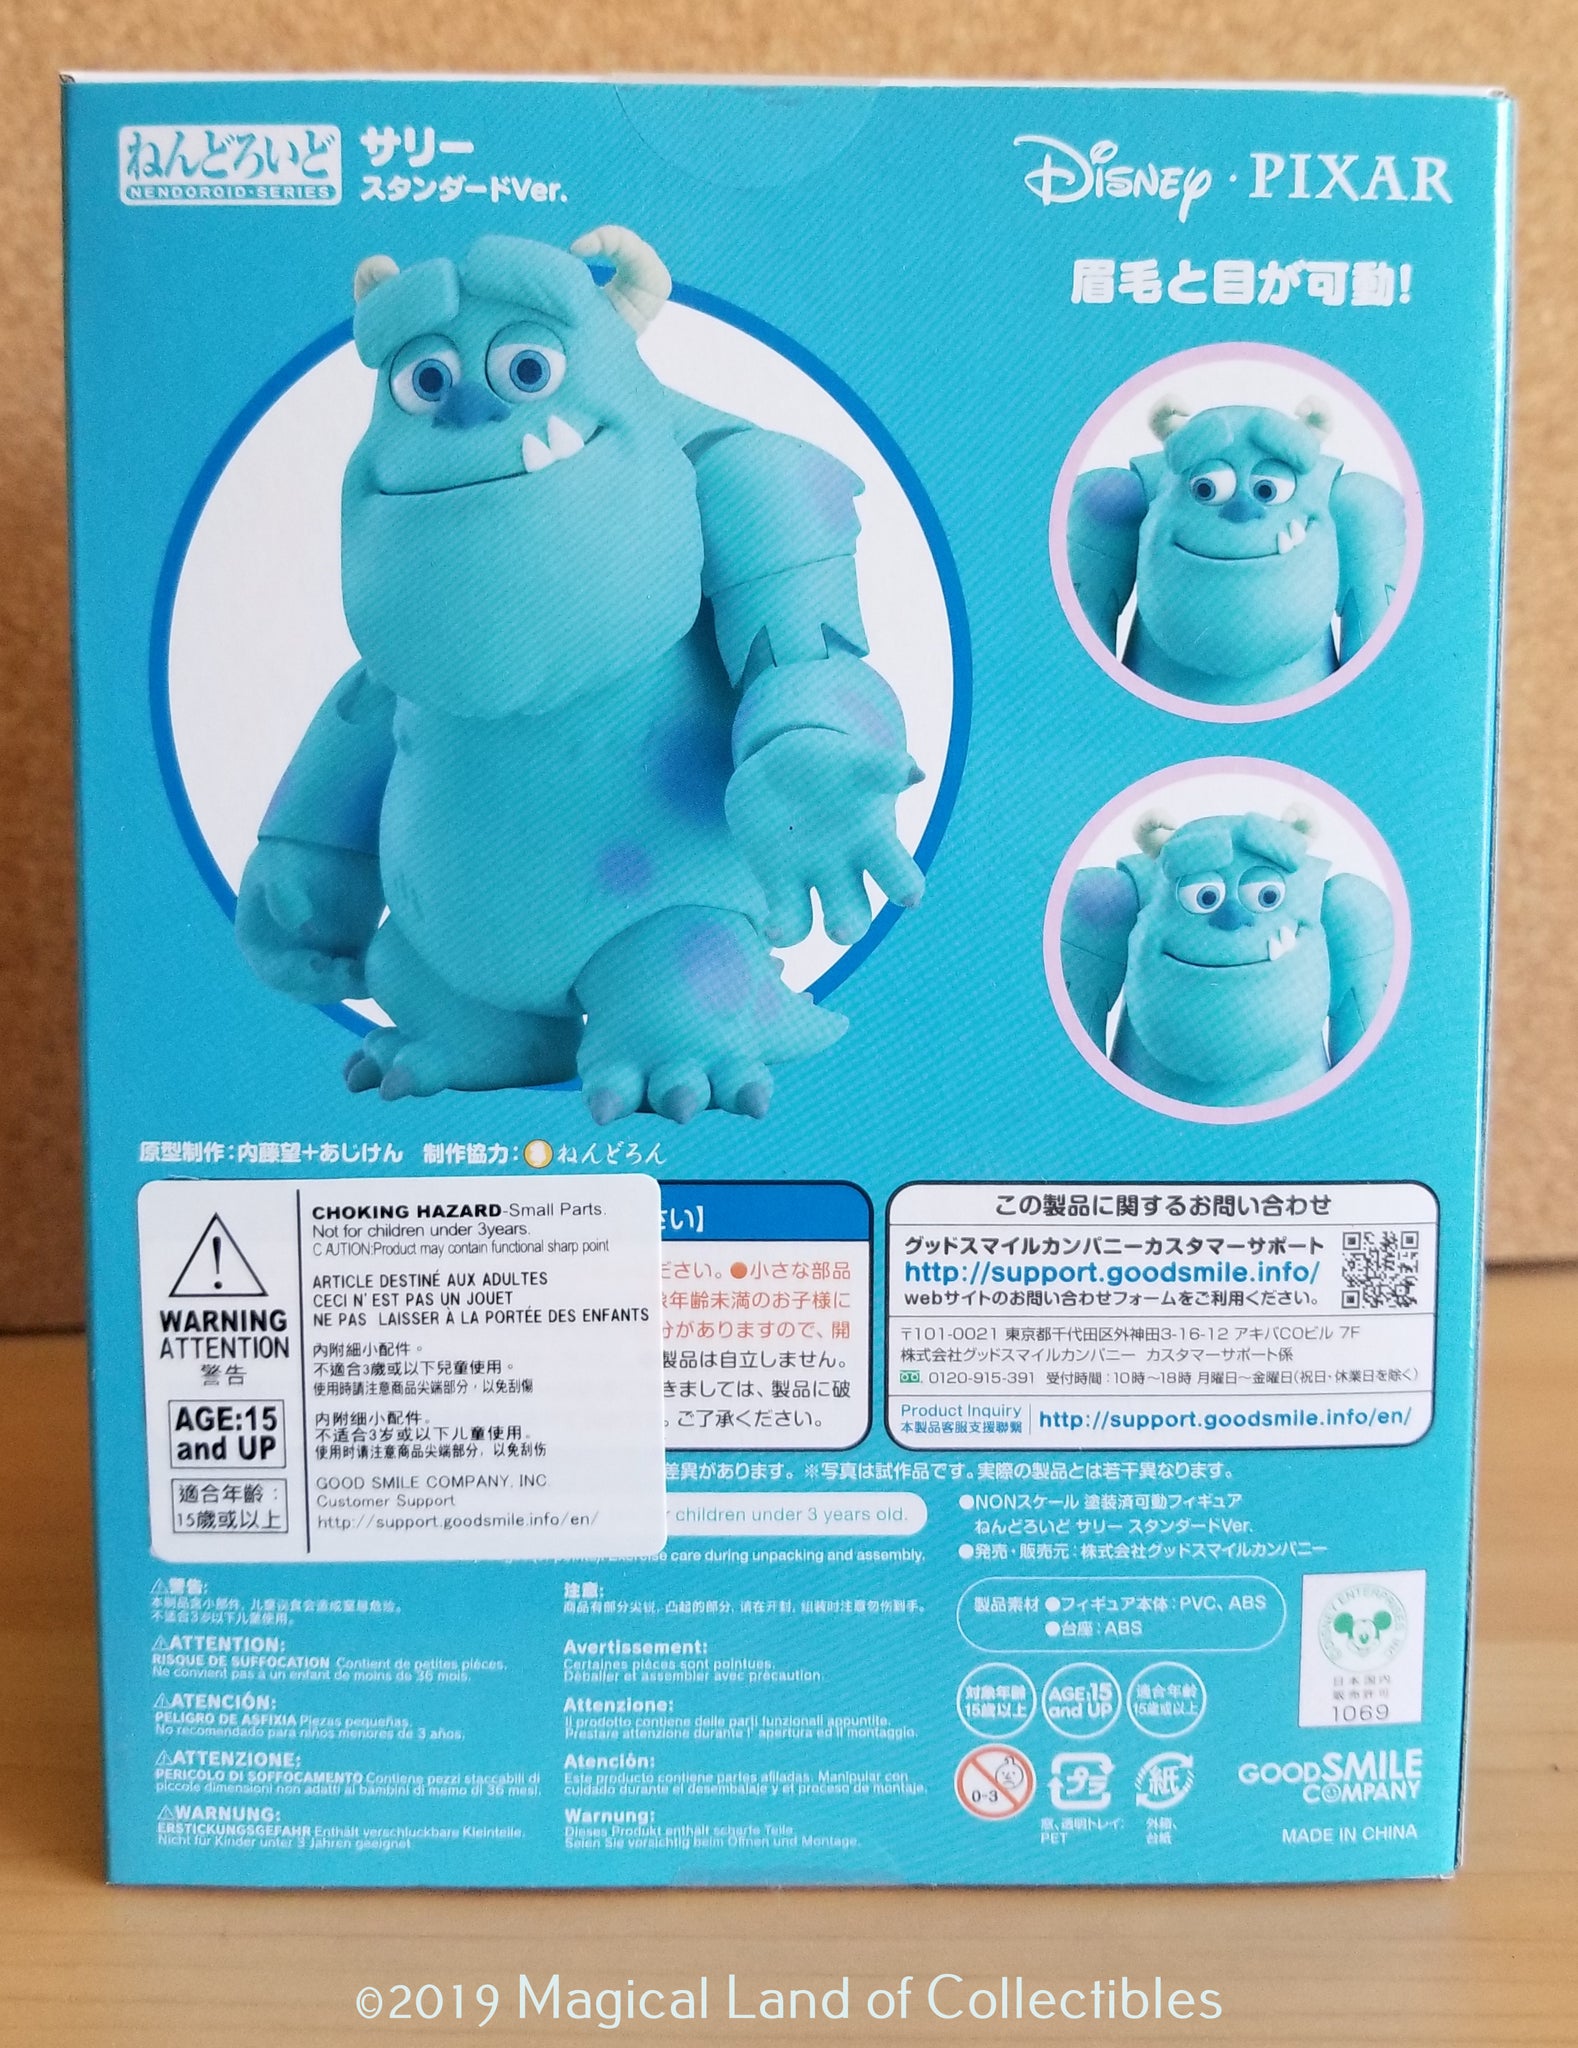 Monsters Inc. Sulley Nendoroid (Deluxe) – Magical Land of Collectibles